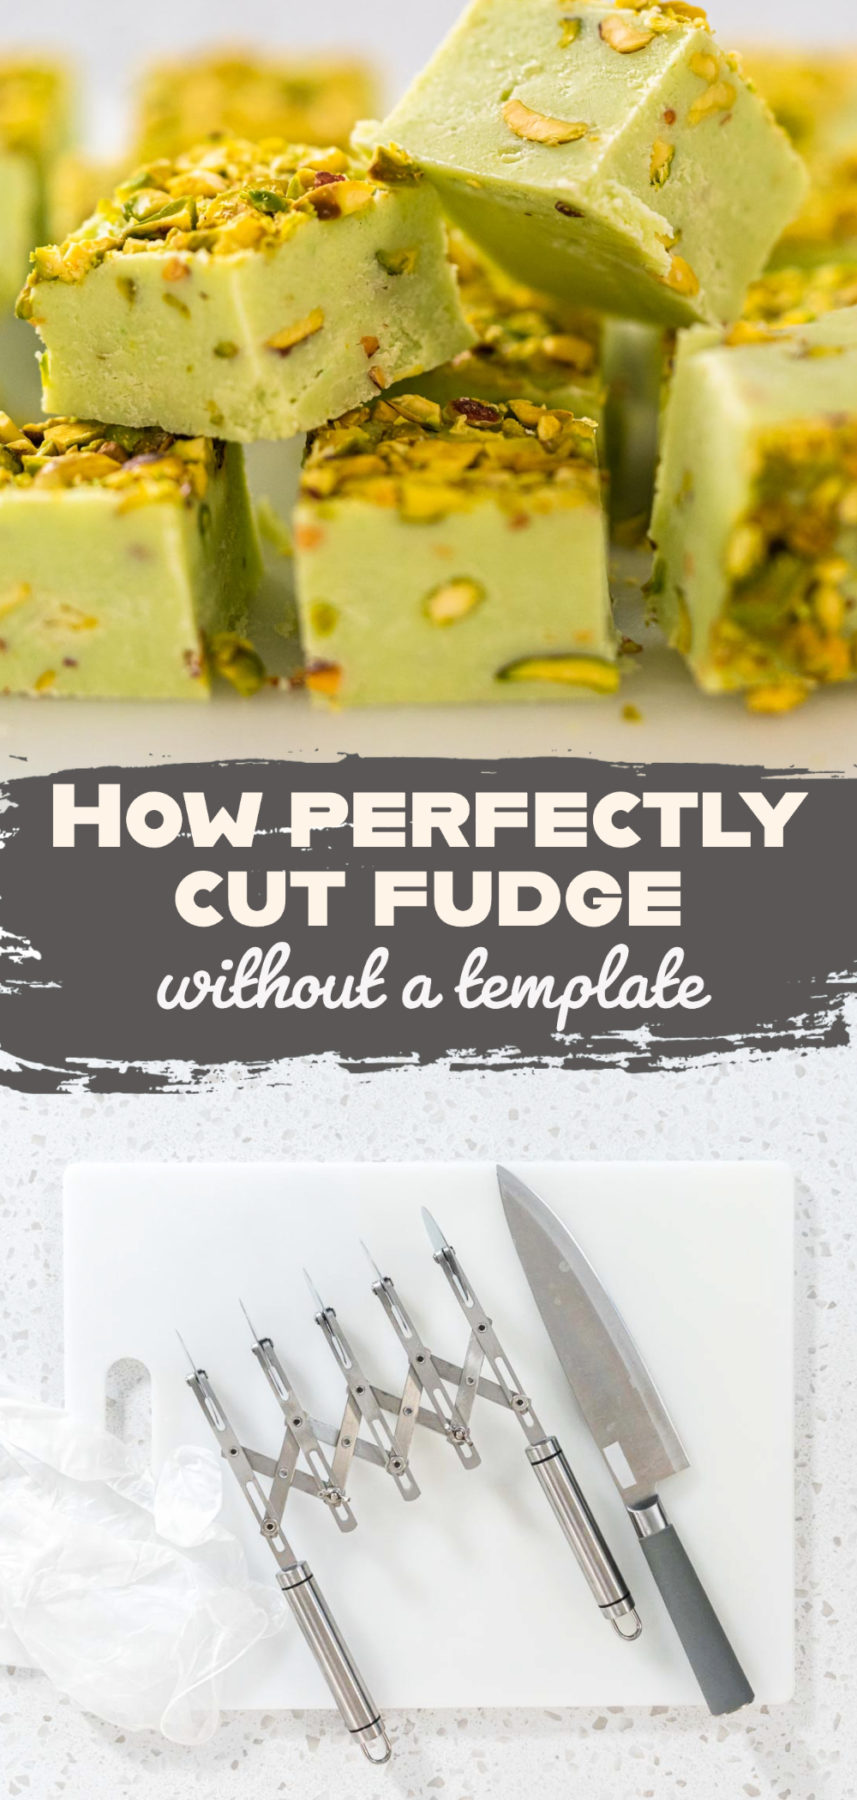 How perfectly cut fudge without a template